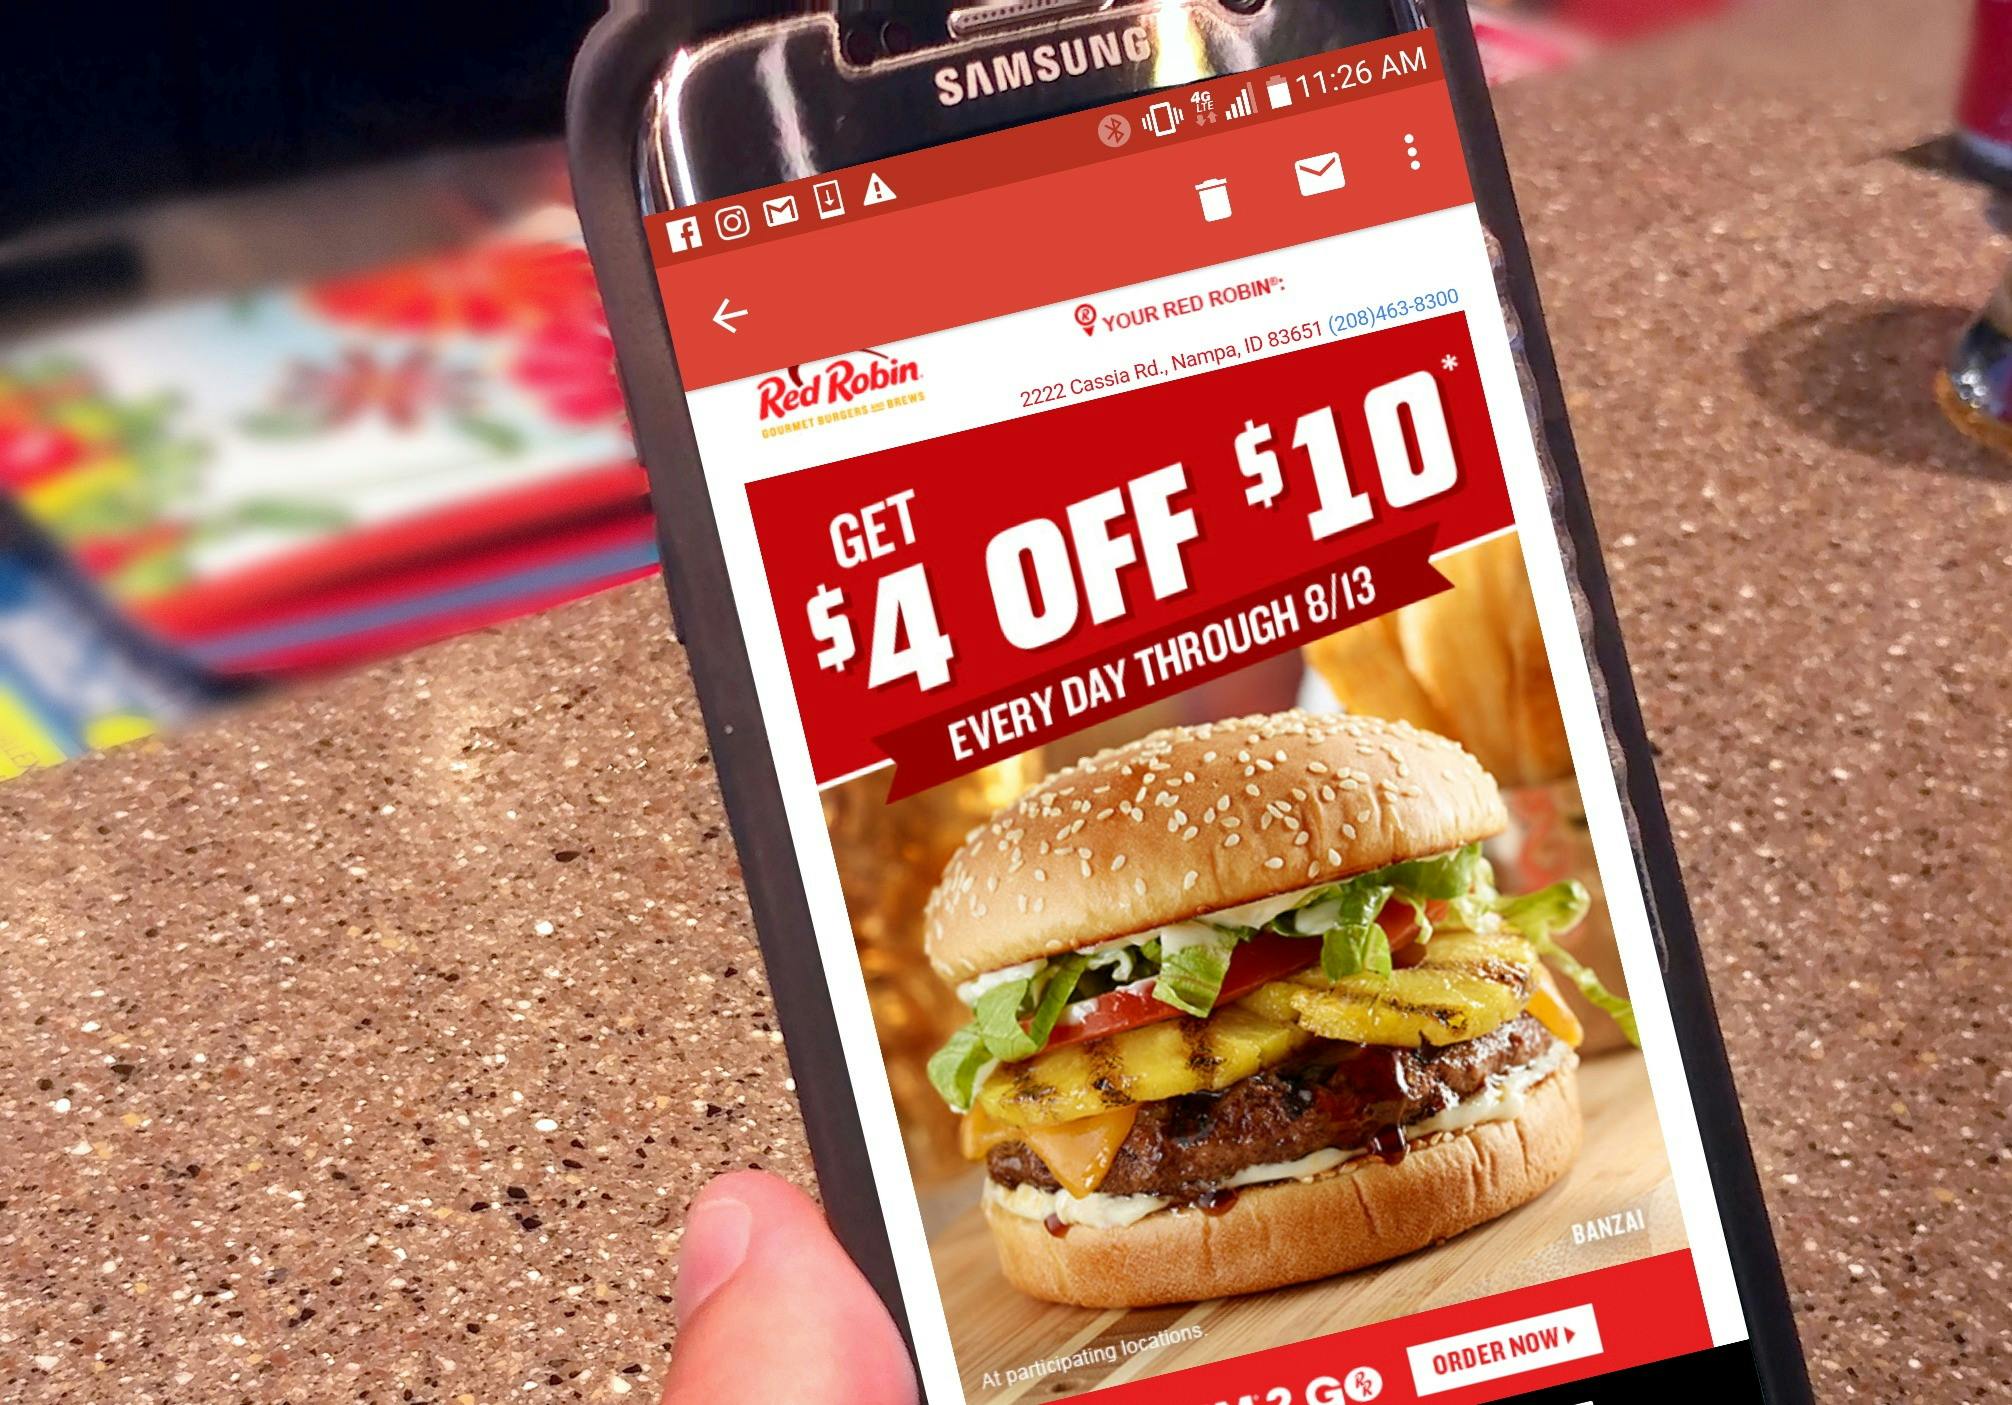 A person's hand holding up a cell phone with the Red Robin mobile app open to the Royalty Rewards offers.